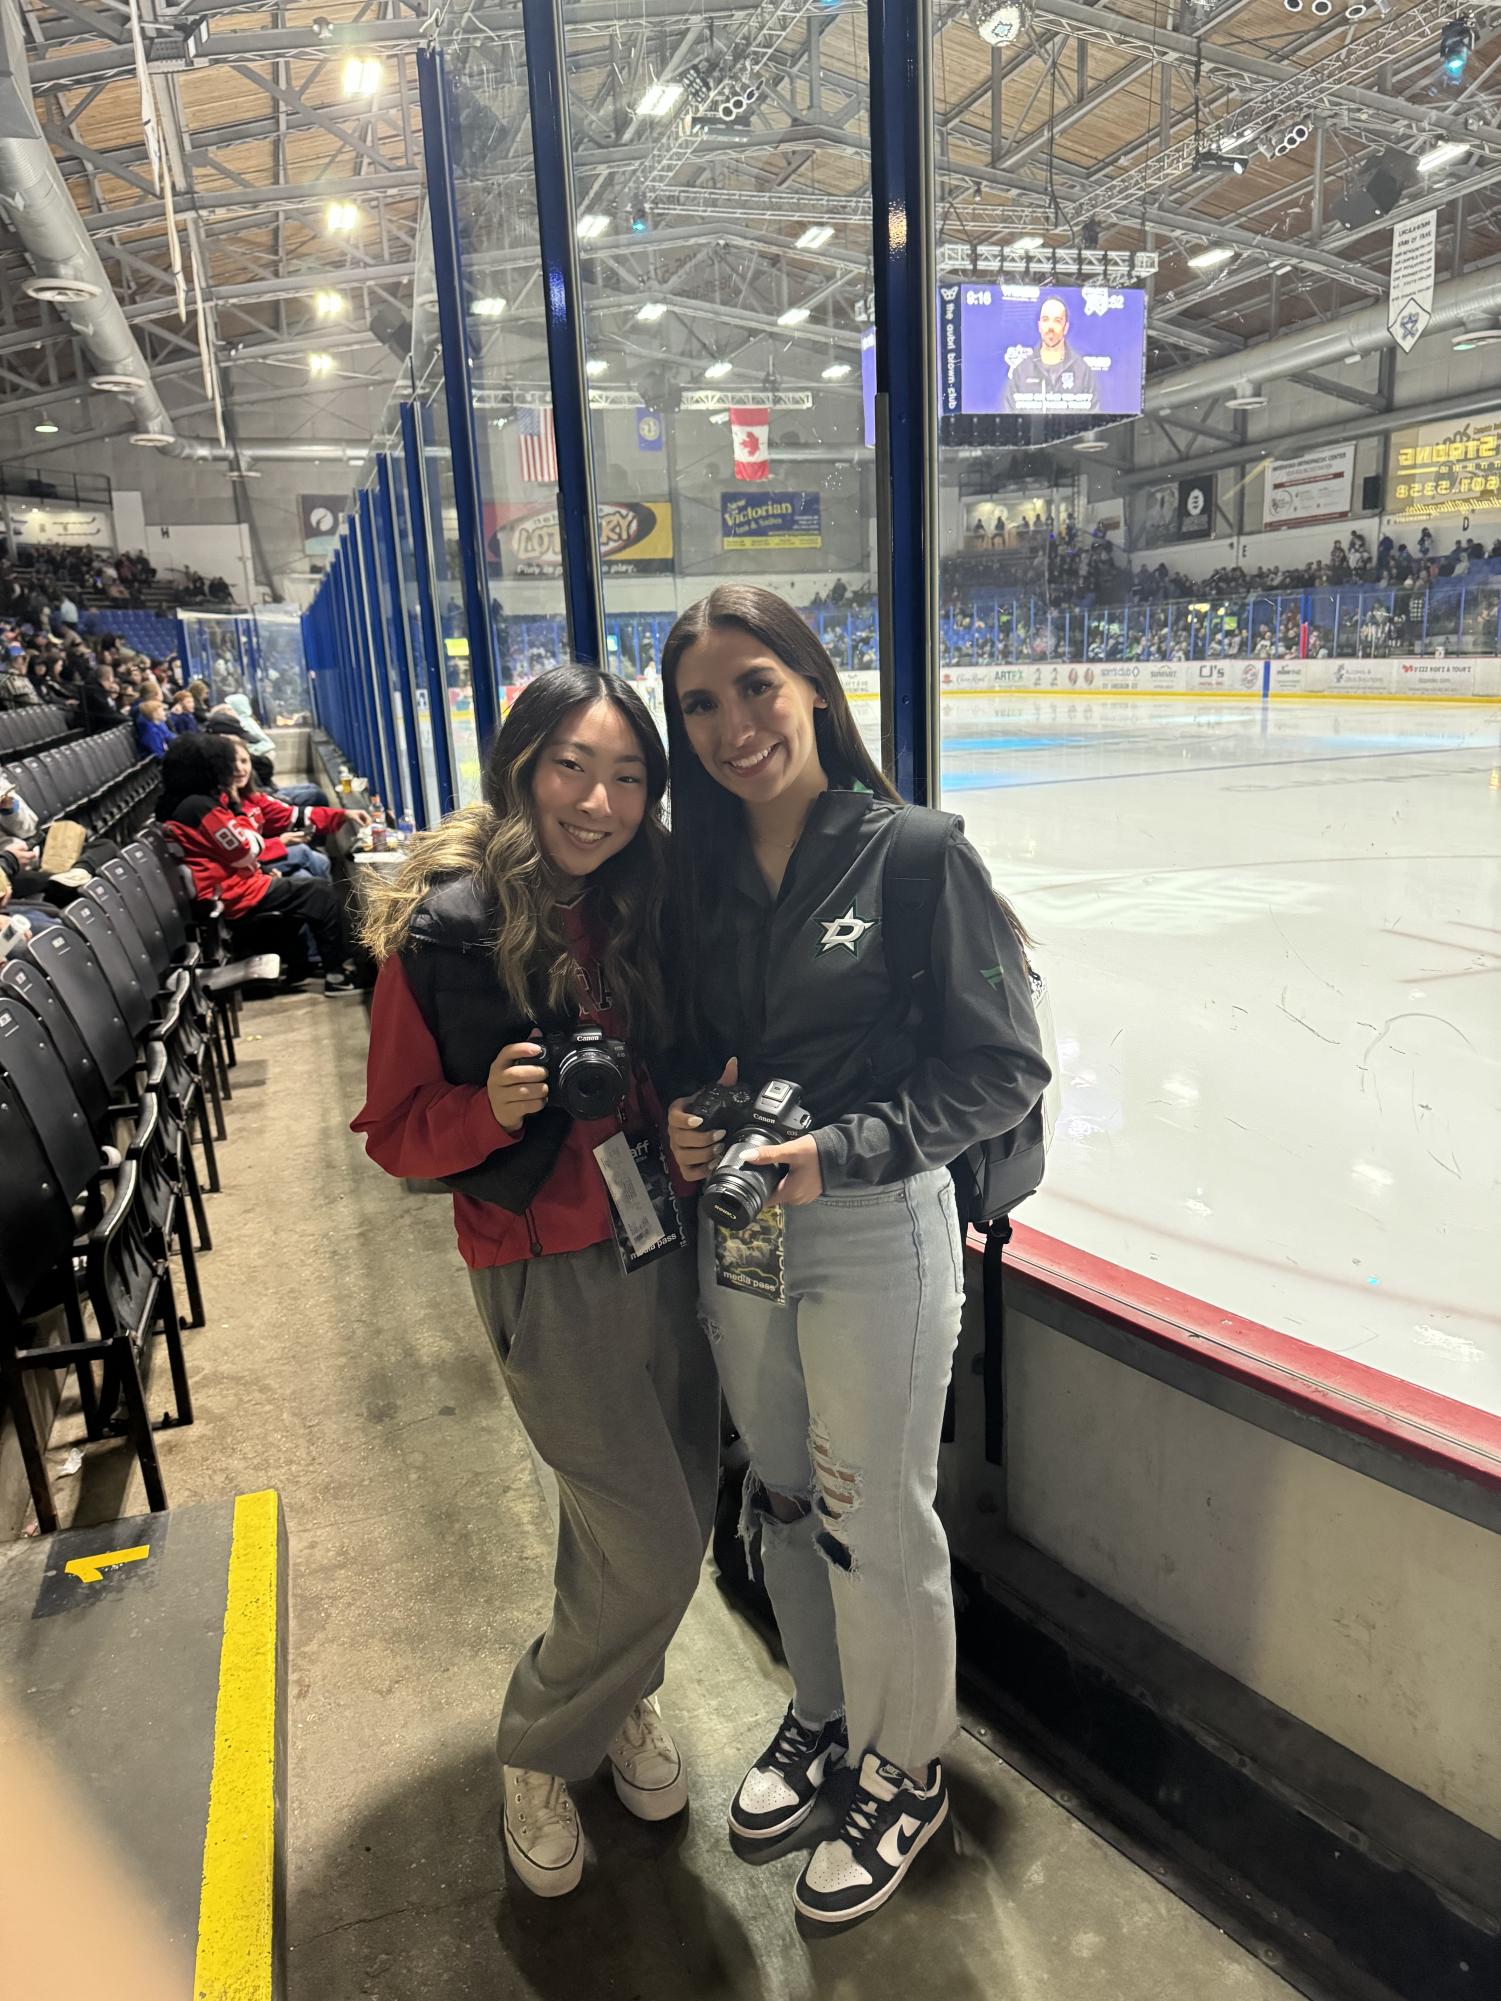 2022 alum Grace Pechacek takes photos at a Lincoln Stars hockey game for her UNLimited Sports class. Photo provided by Grace Pechacek.